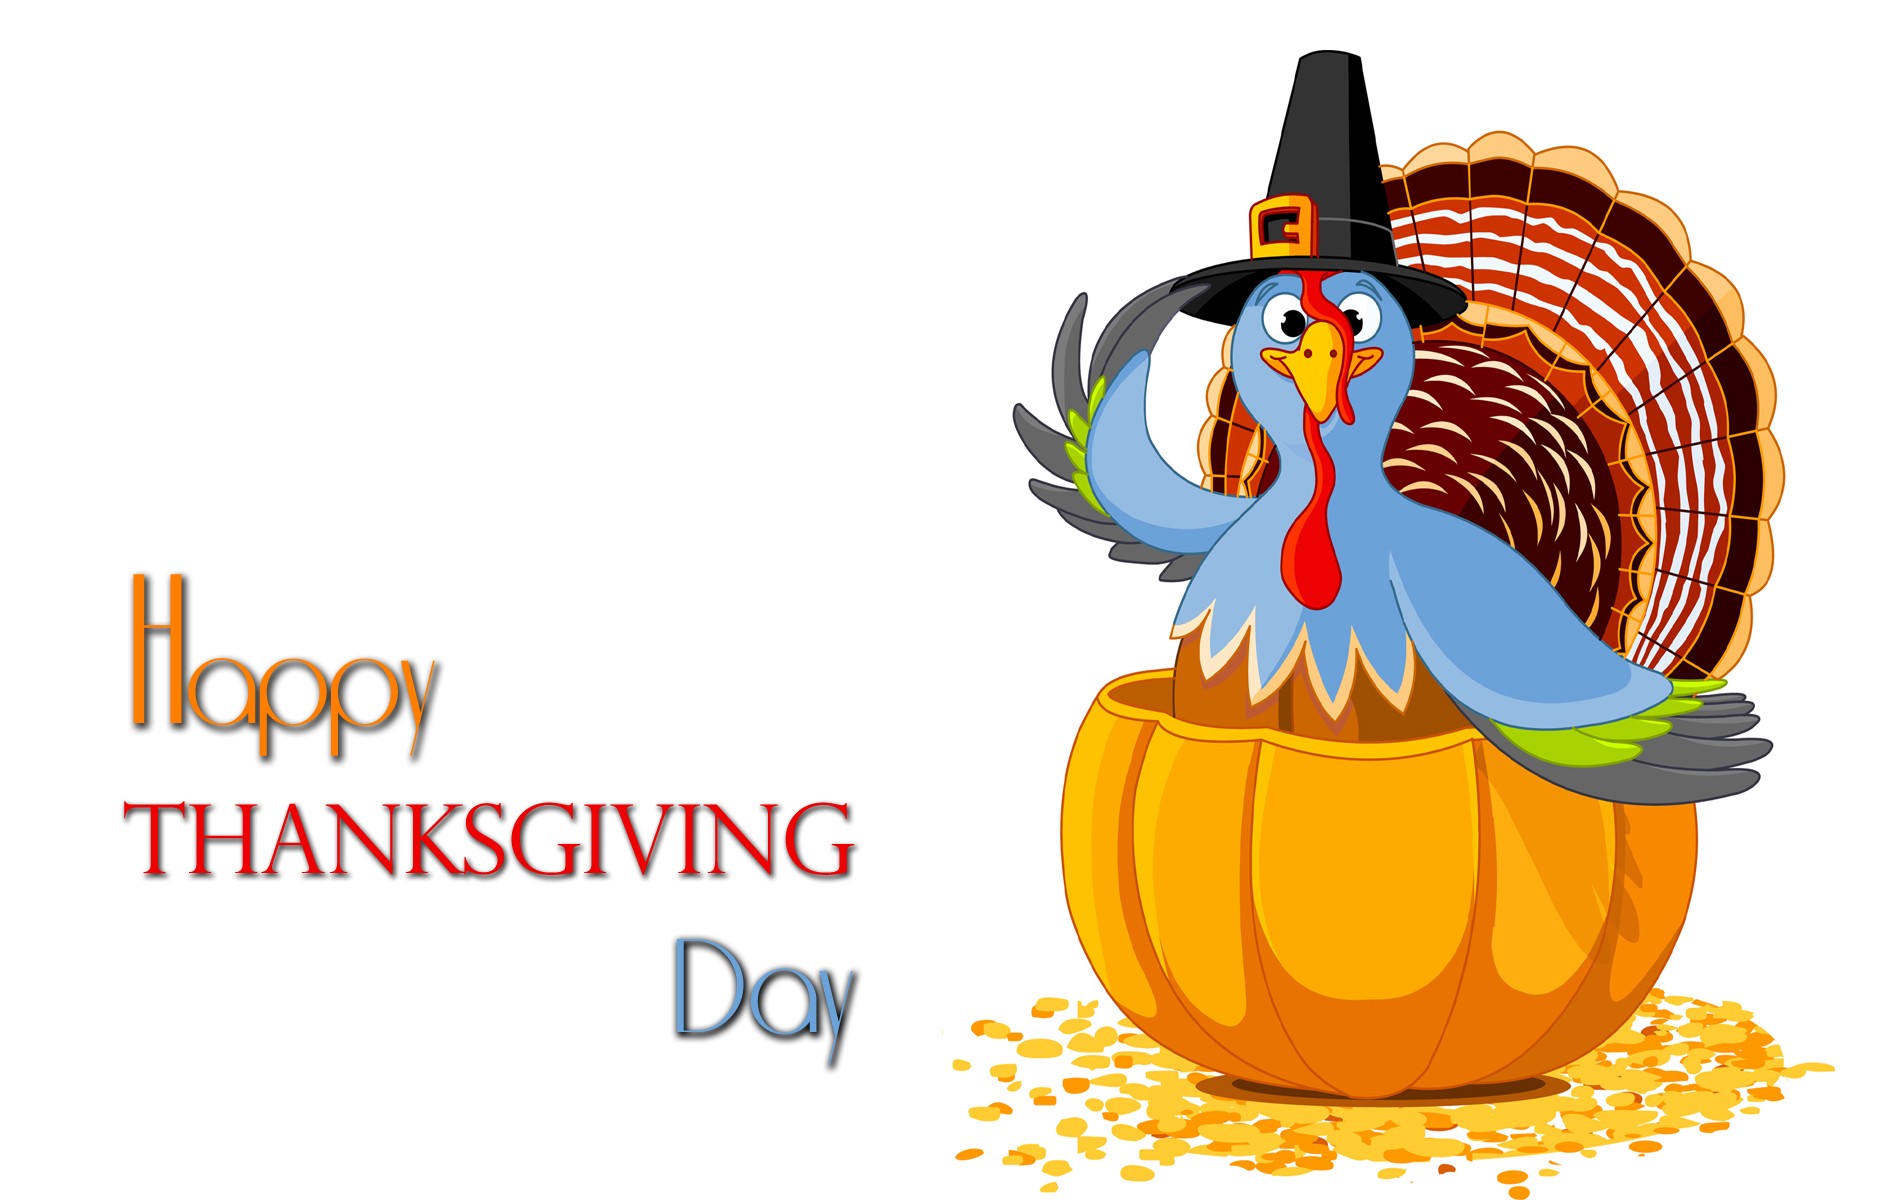 Happy Thanksgiving Day Image